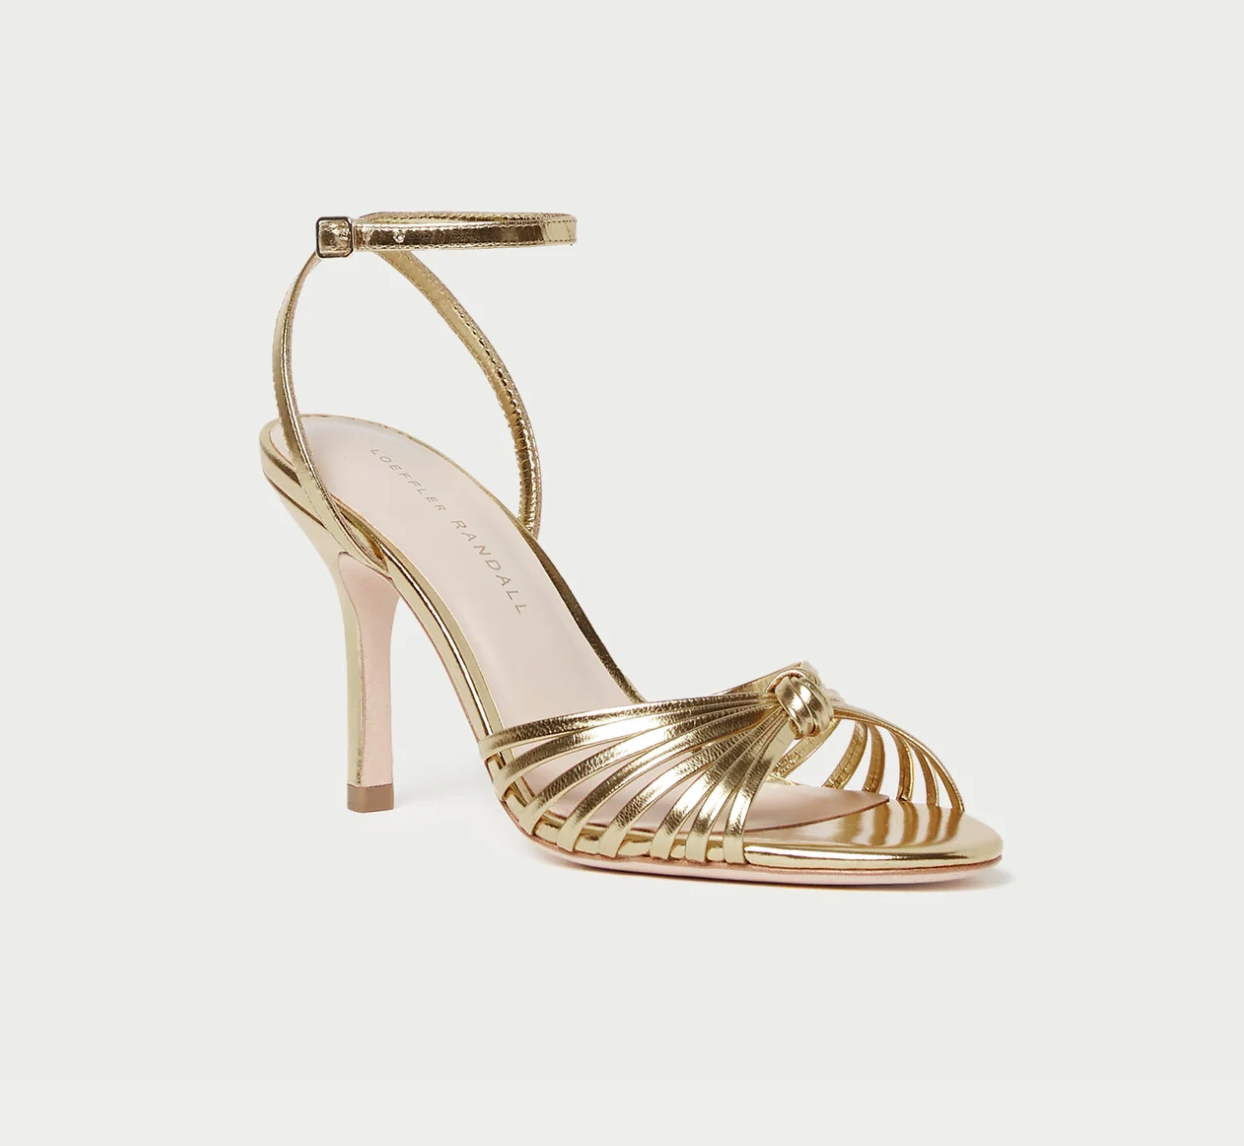 Ada Gold Knot Heeled Sandal – Only on The Avenue